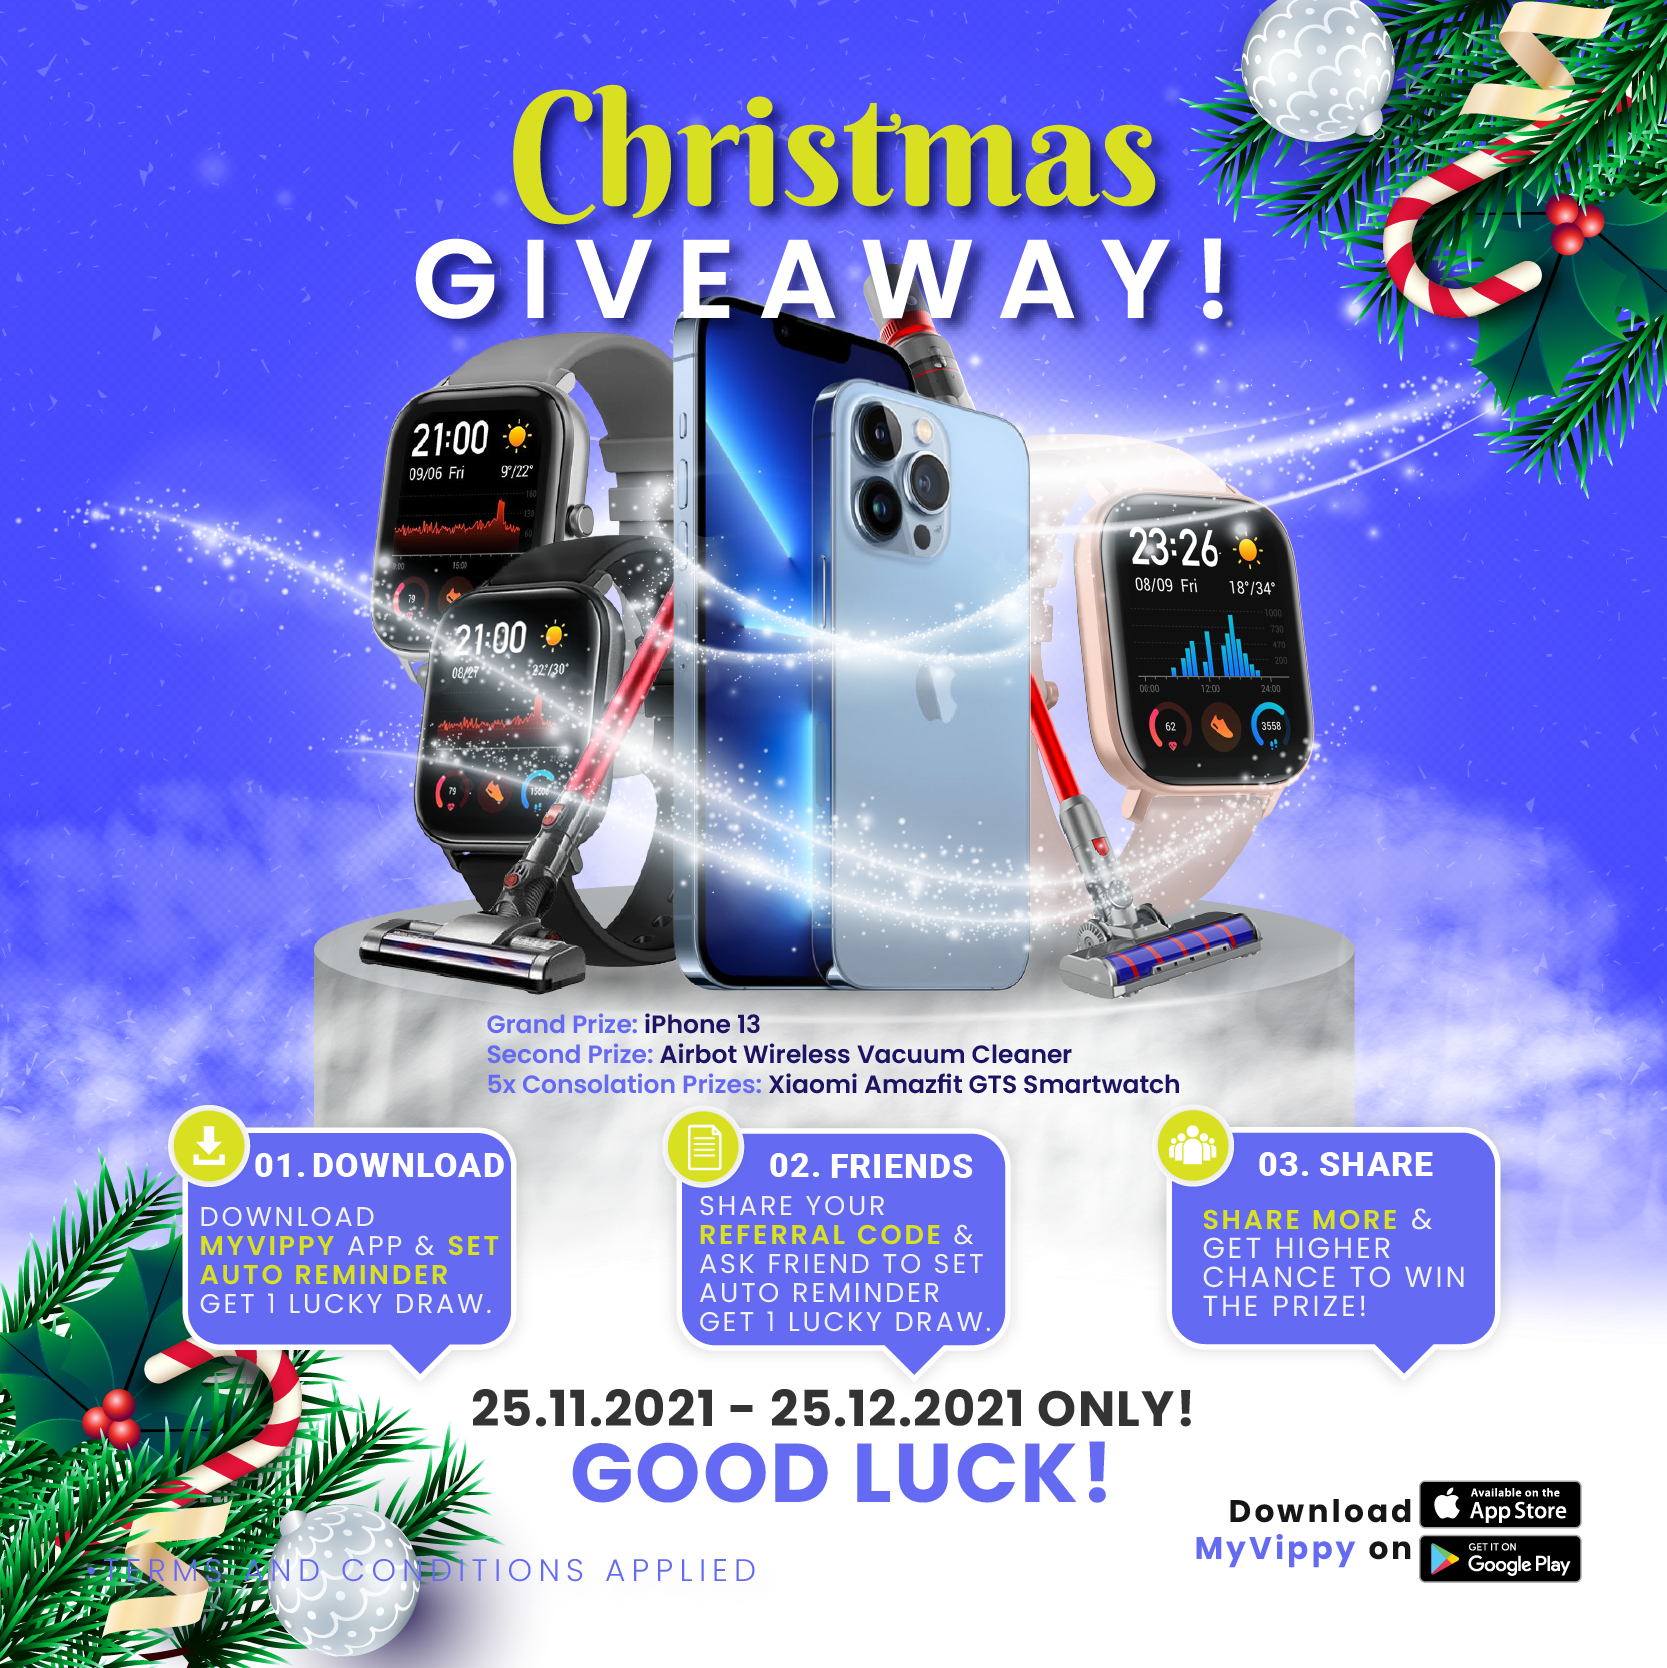 Social Media Campaign - 2021 Christmas Giveaway